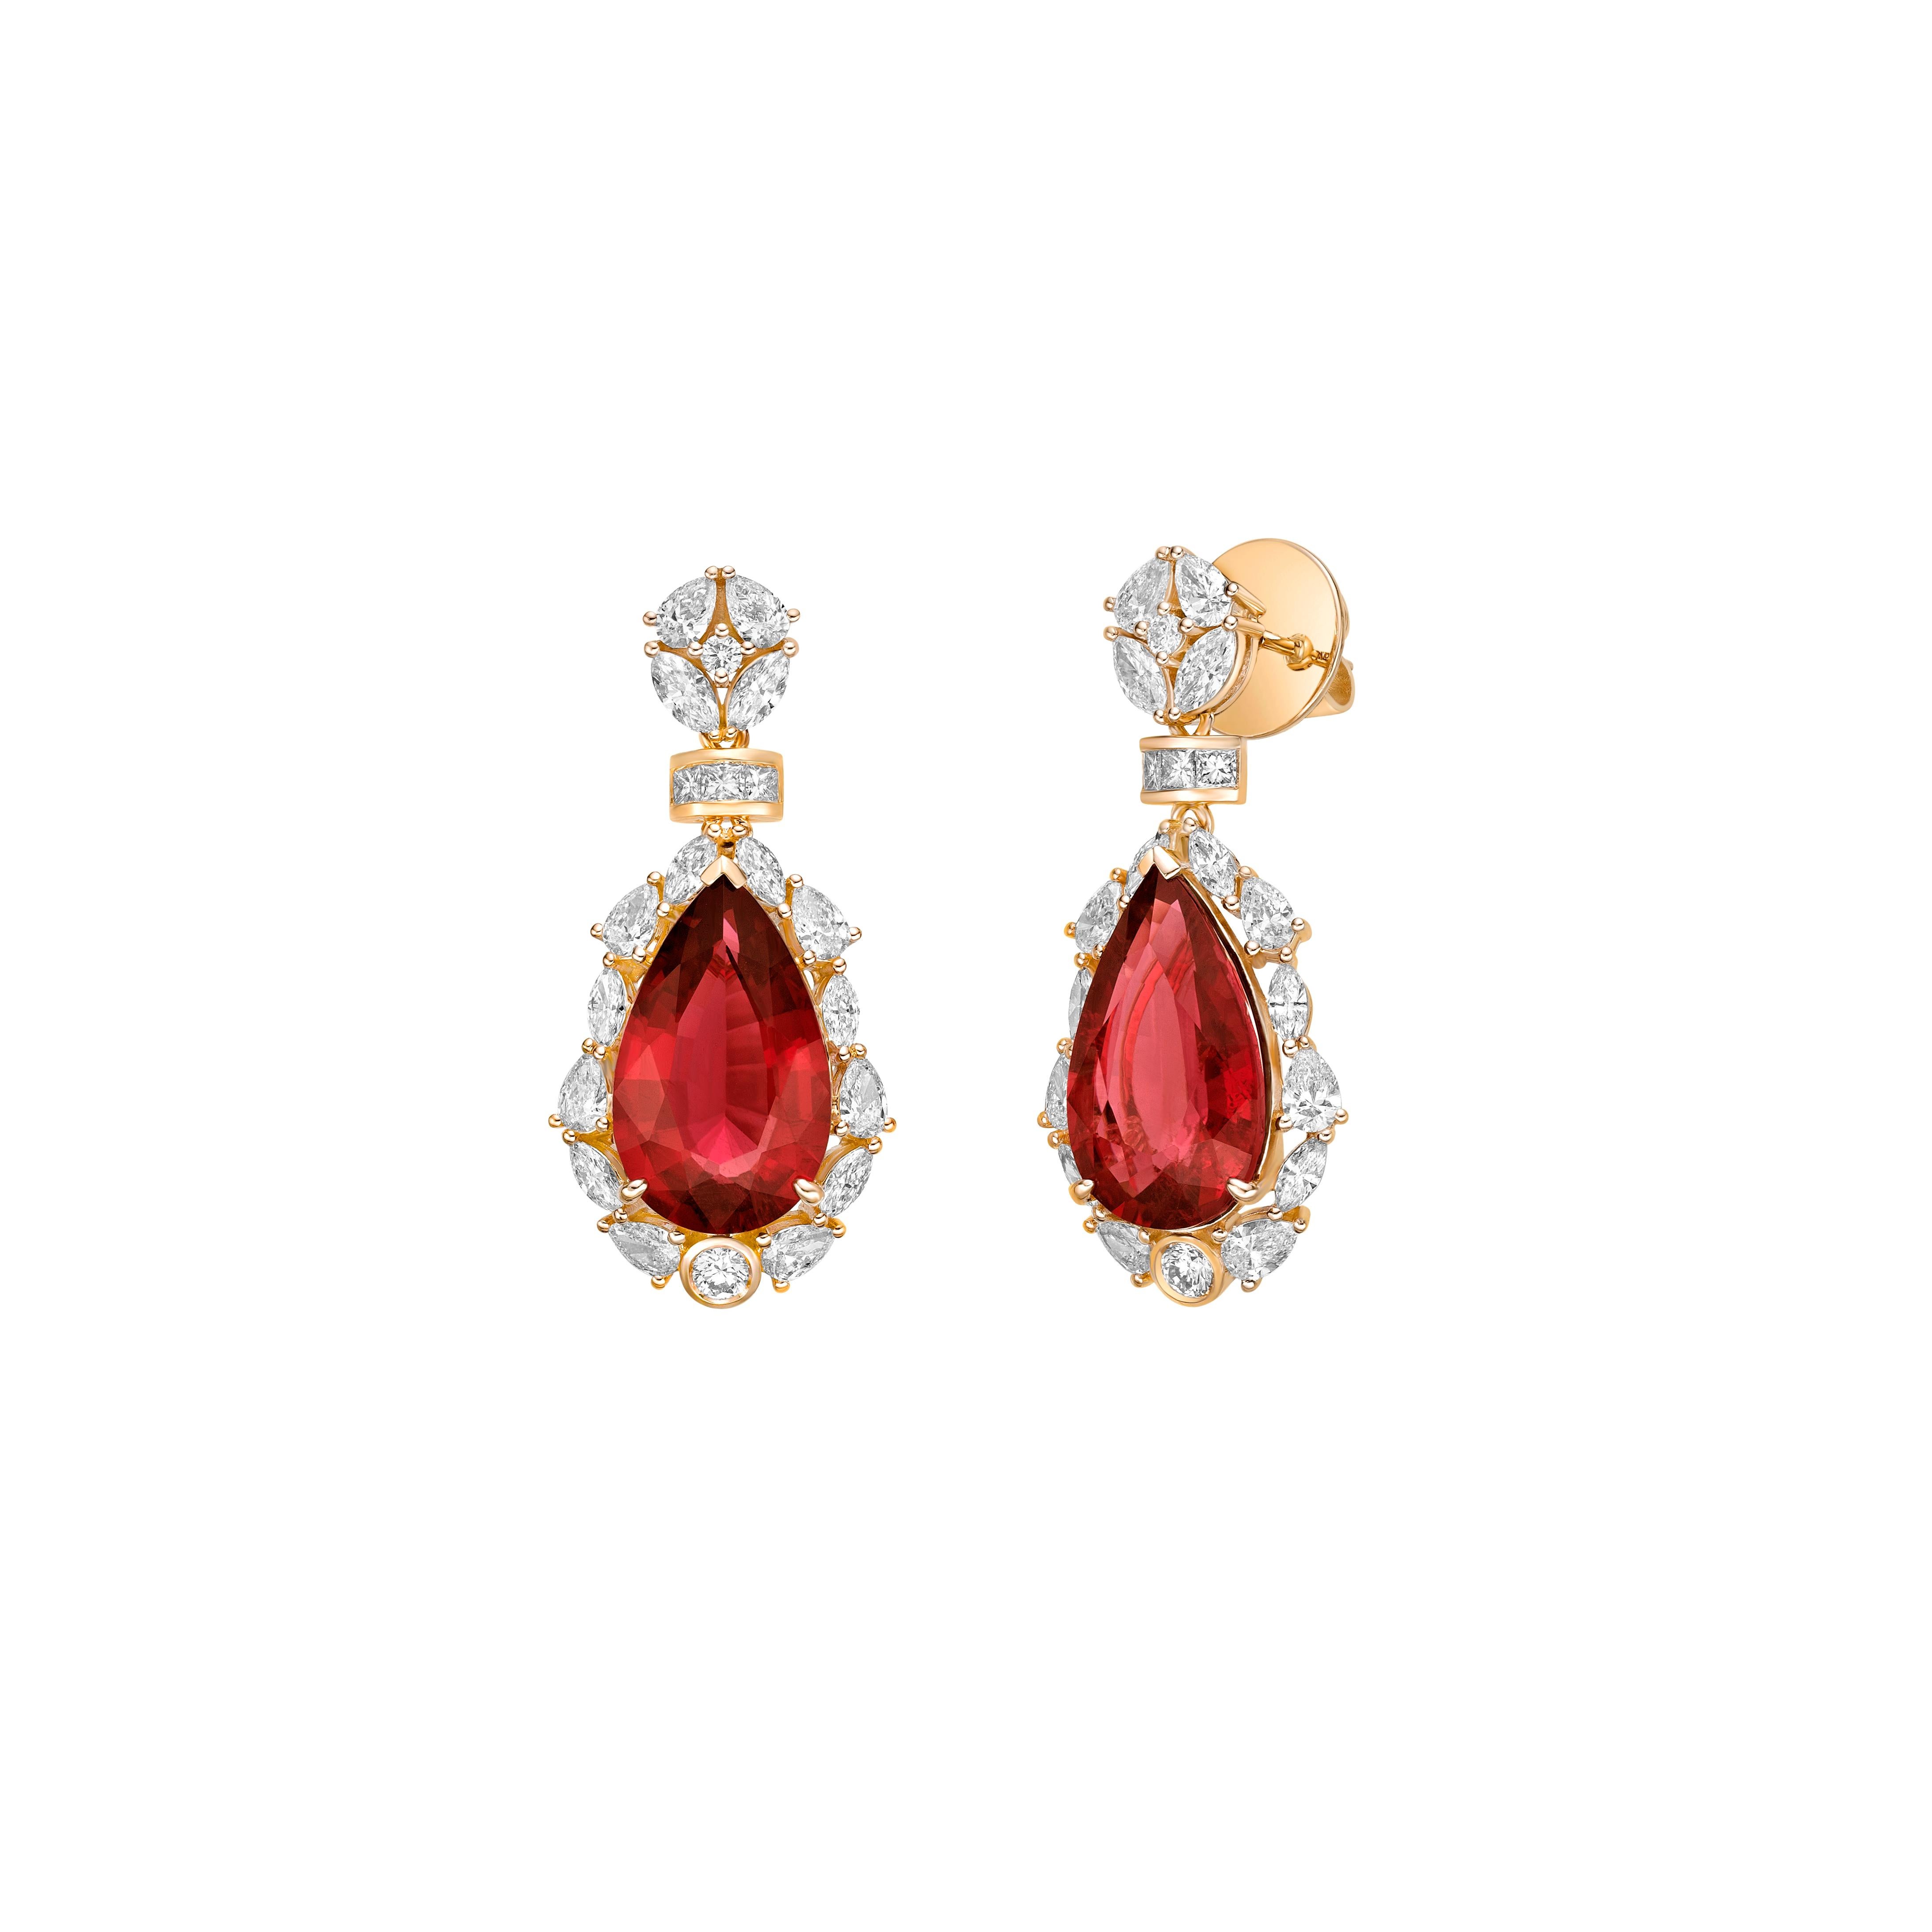 Pear Cut 13.842 Carat Rubellite Drop Earrings in 18Karat Yellow Gold with White Diamond. For Sale